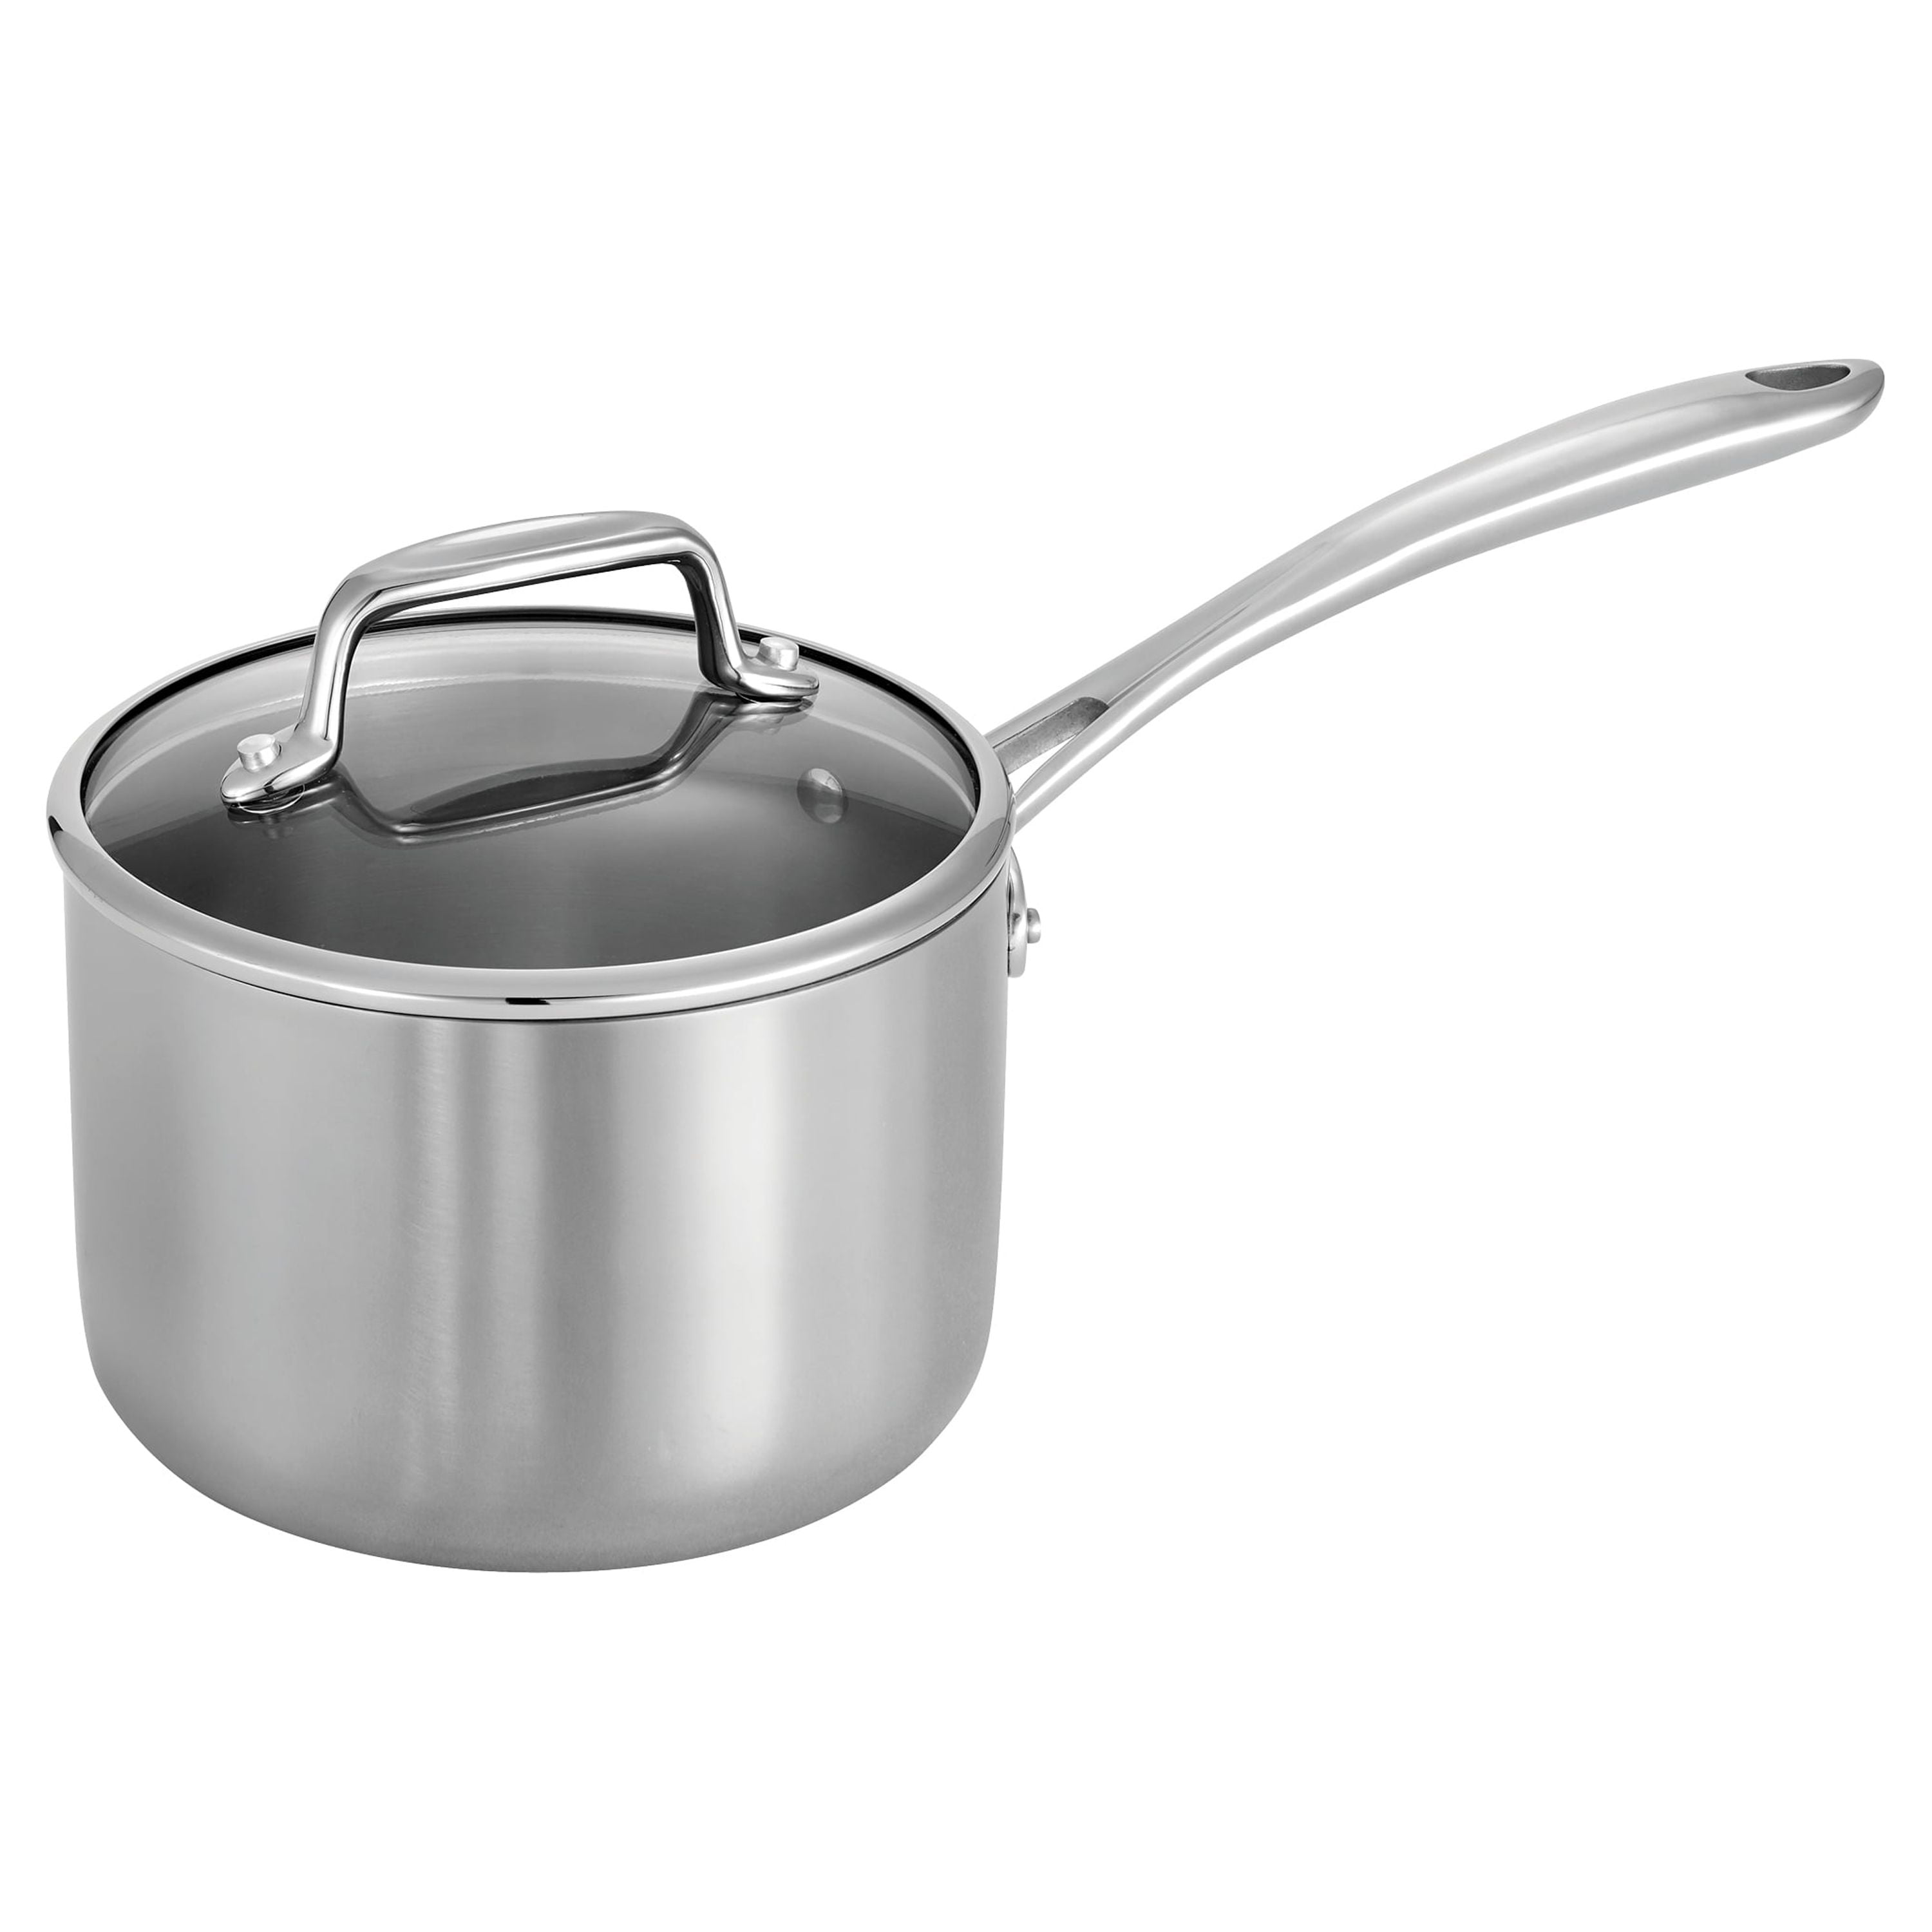 SLOTTET Tri-Ply Whole-Clad Stainless Steel Sauce Pan with Pour Spout ,2.5  Quart Small Multipurpose Pasta Pot with Strainer Glass Lid, Saucepan for